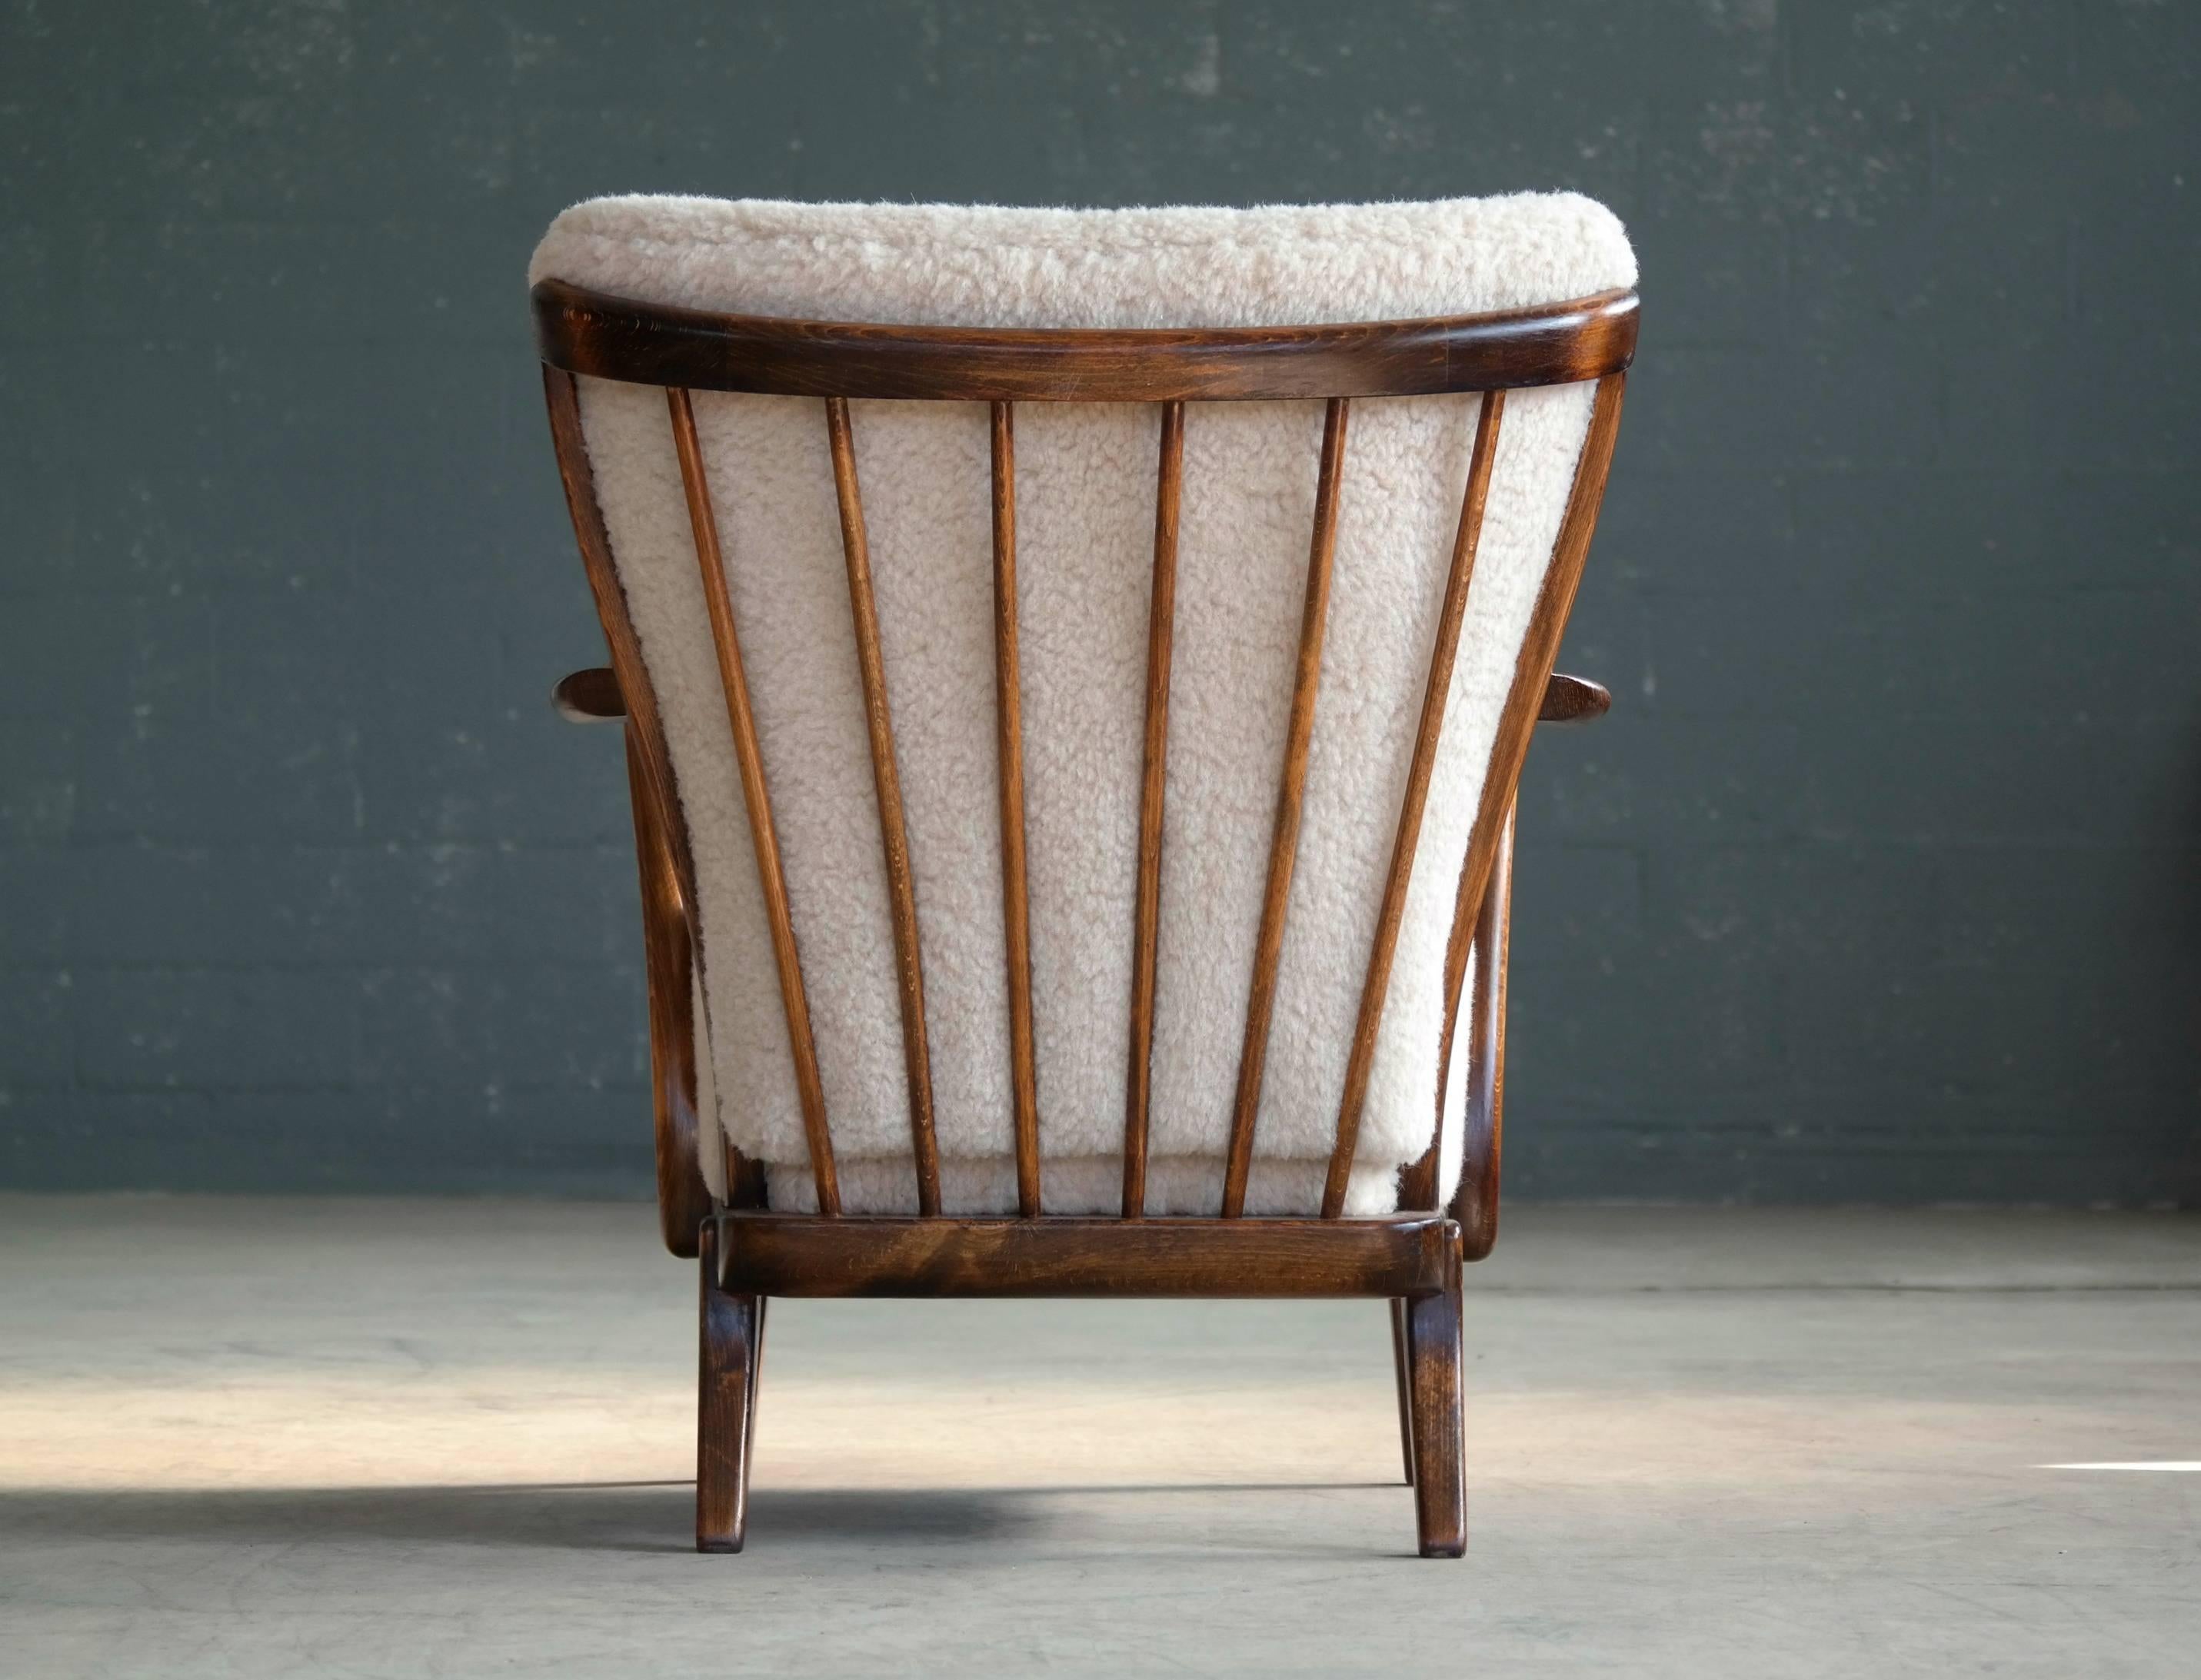 Stained Danish 1940s Spindle Back Lounge Chair in Lambswool by Alfred Christensen